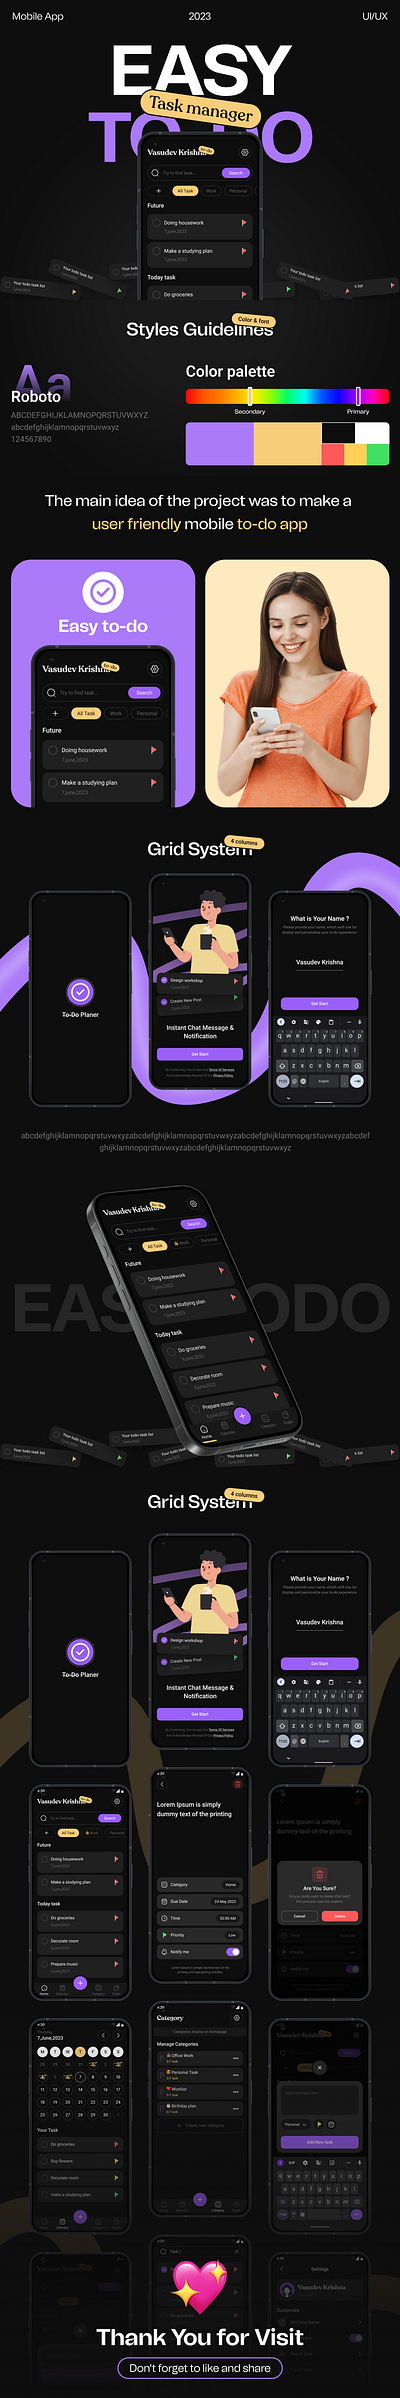 Easy Todo App UI Design With Animation For Android or IOS. android animation branding figma graphic design ios logo motion graphics ui